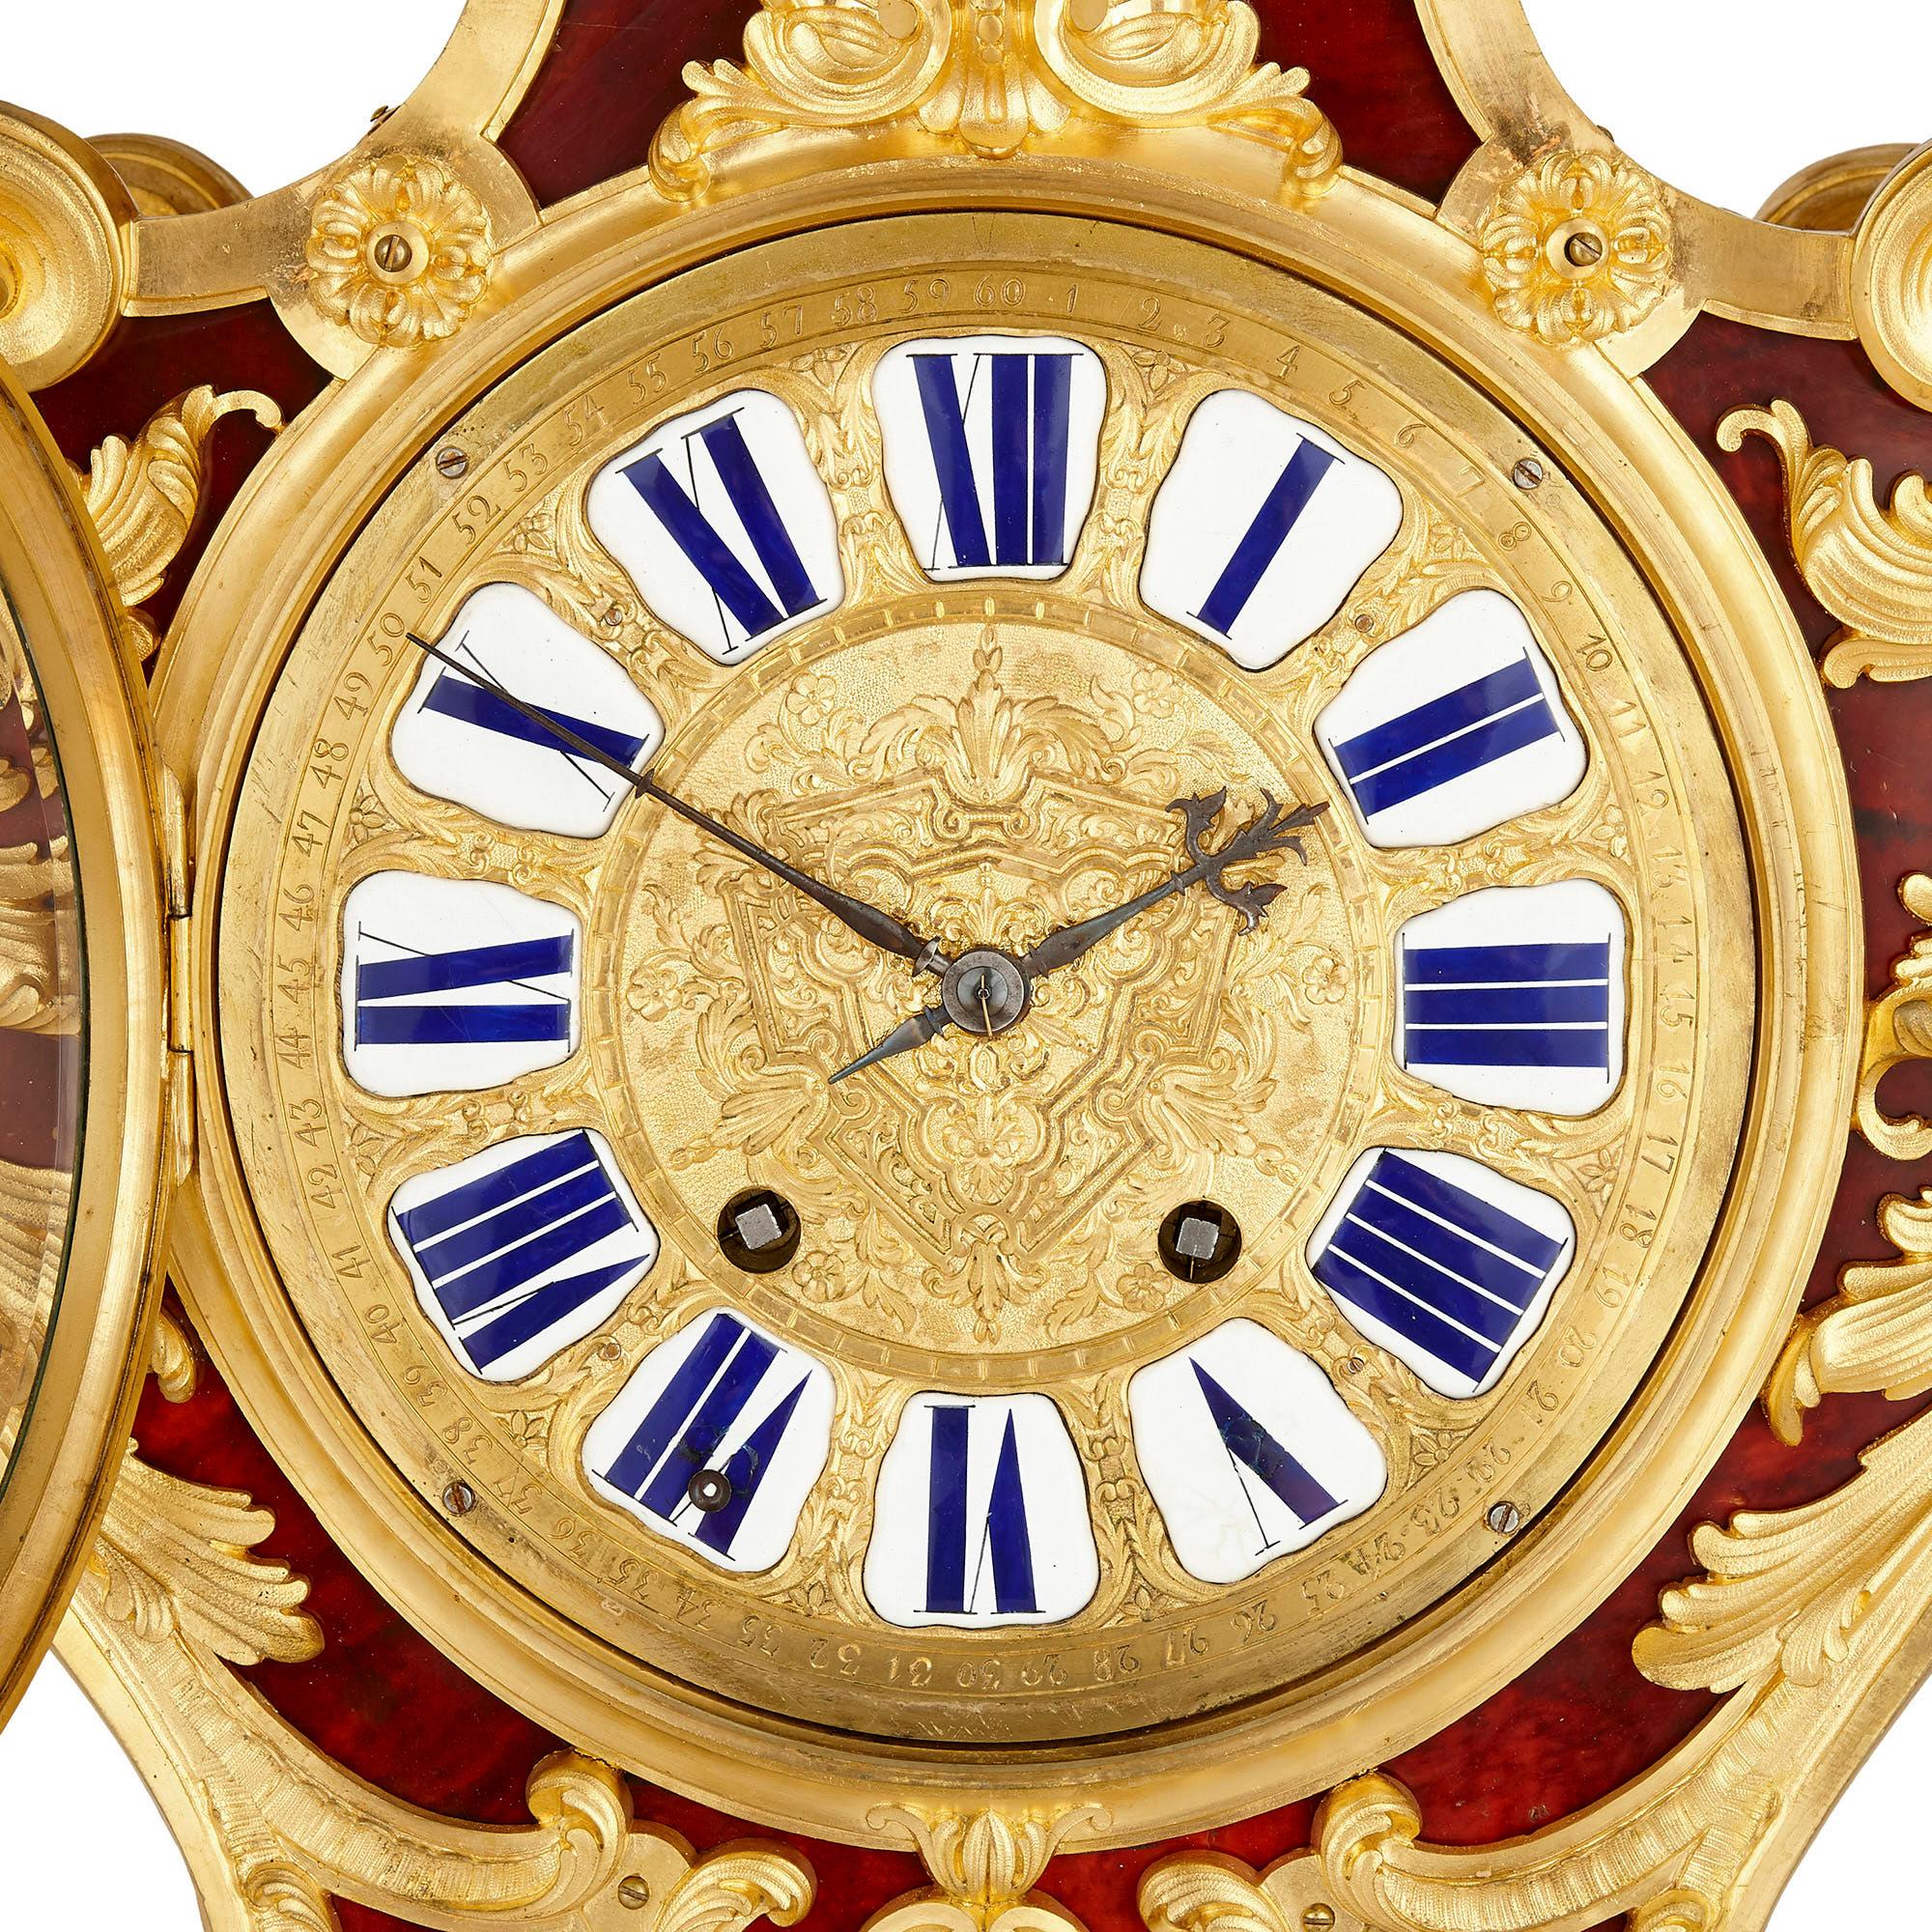 Louis XV style gilt bronze mounted tortoiseshell bracket clock by Gros
French, circa 1860
Measures: Clock height 90cm, width 52cm, depth 30cm
Bracket height 44cm, width 55cm, depth 34cm

This remarkable bracket clock is by Jean-Louis-Benjamin